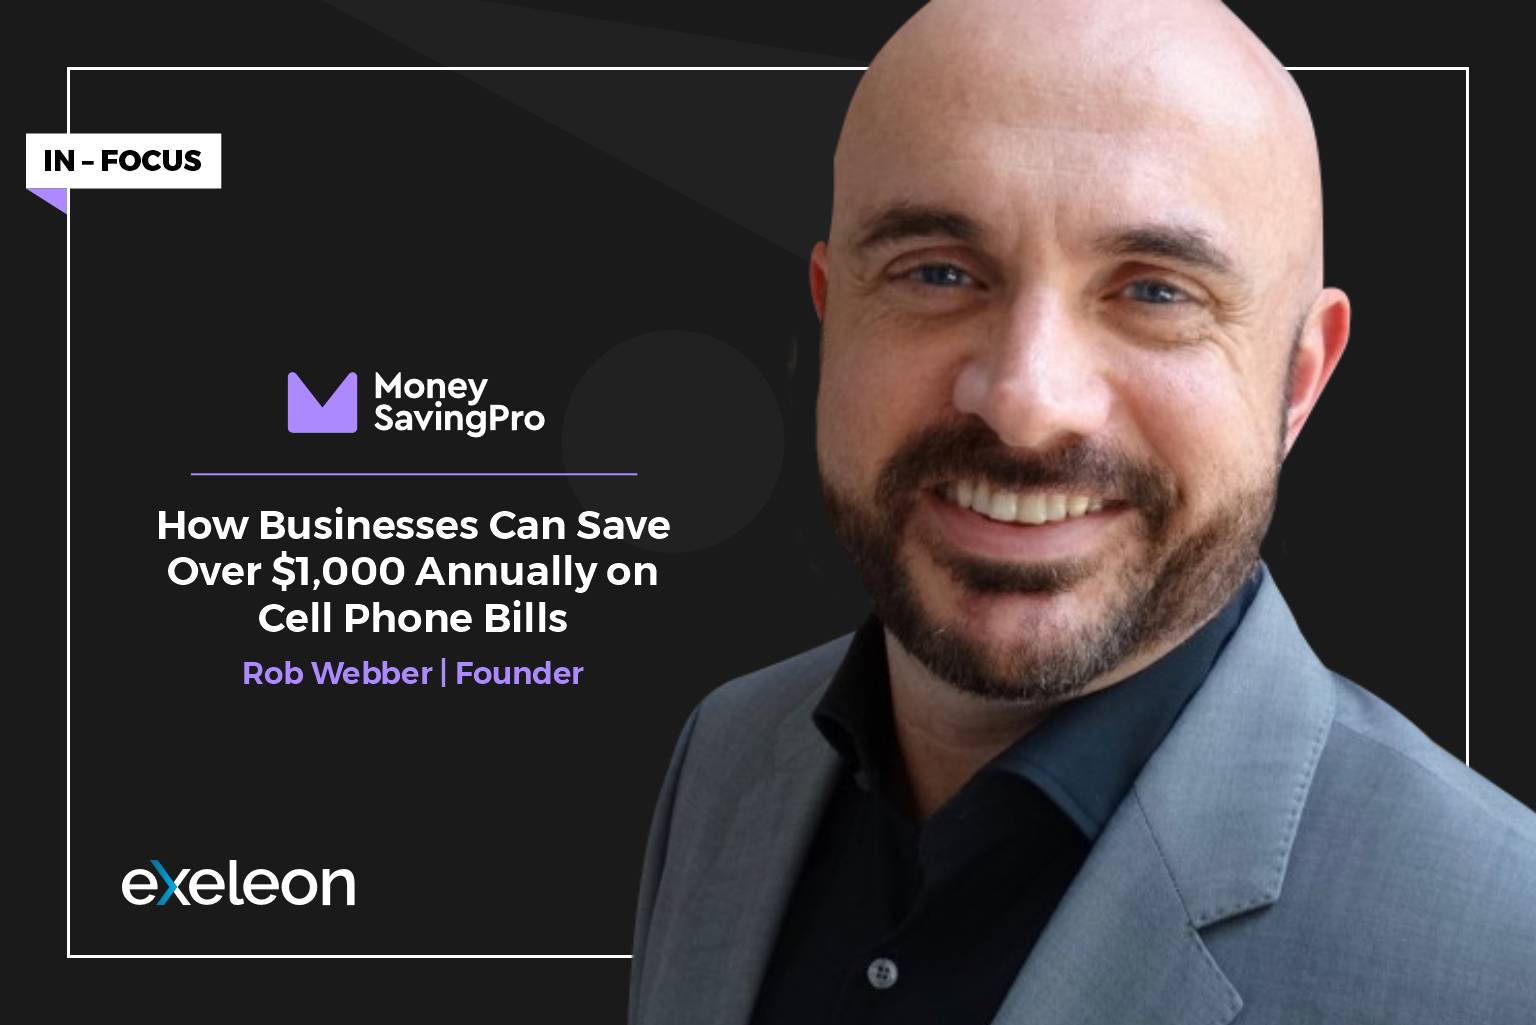 Rob Webber on businesses can save Cell Phone Bills